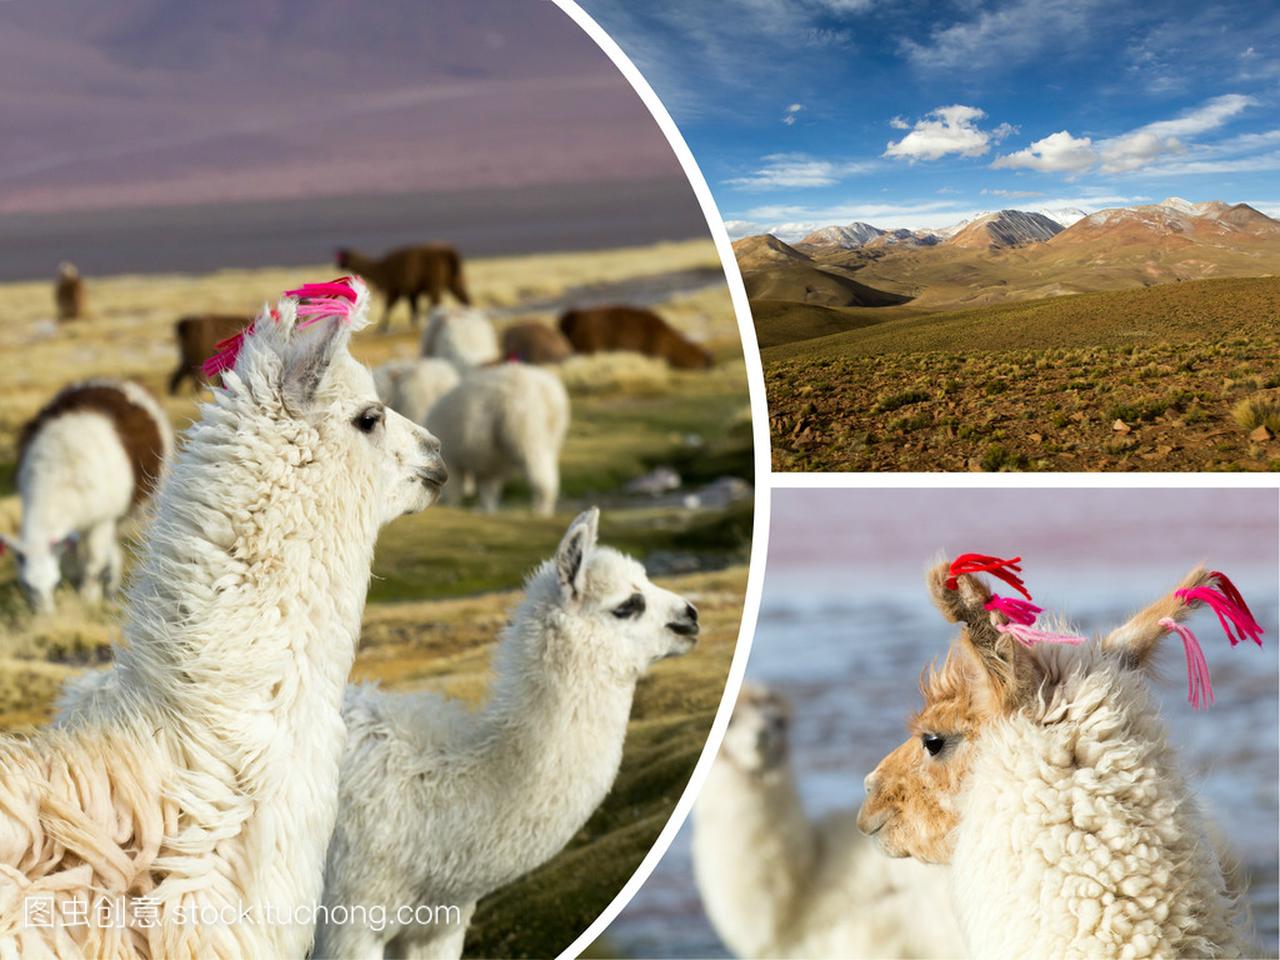 Collage of Bolivia images - travel background (